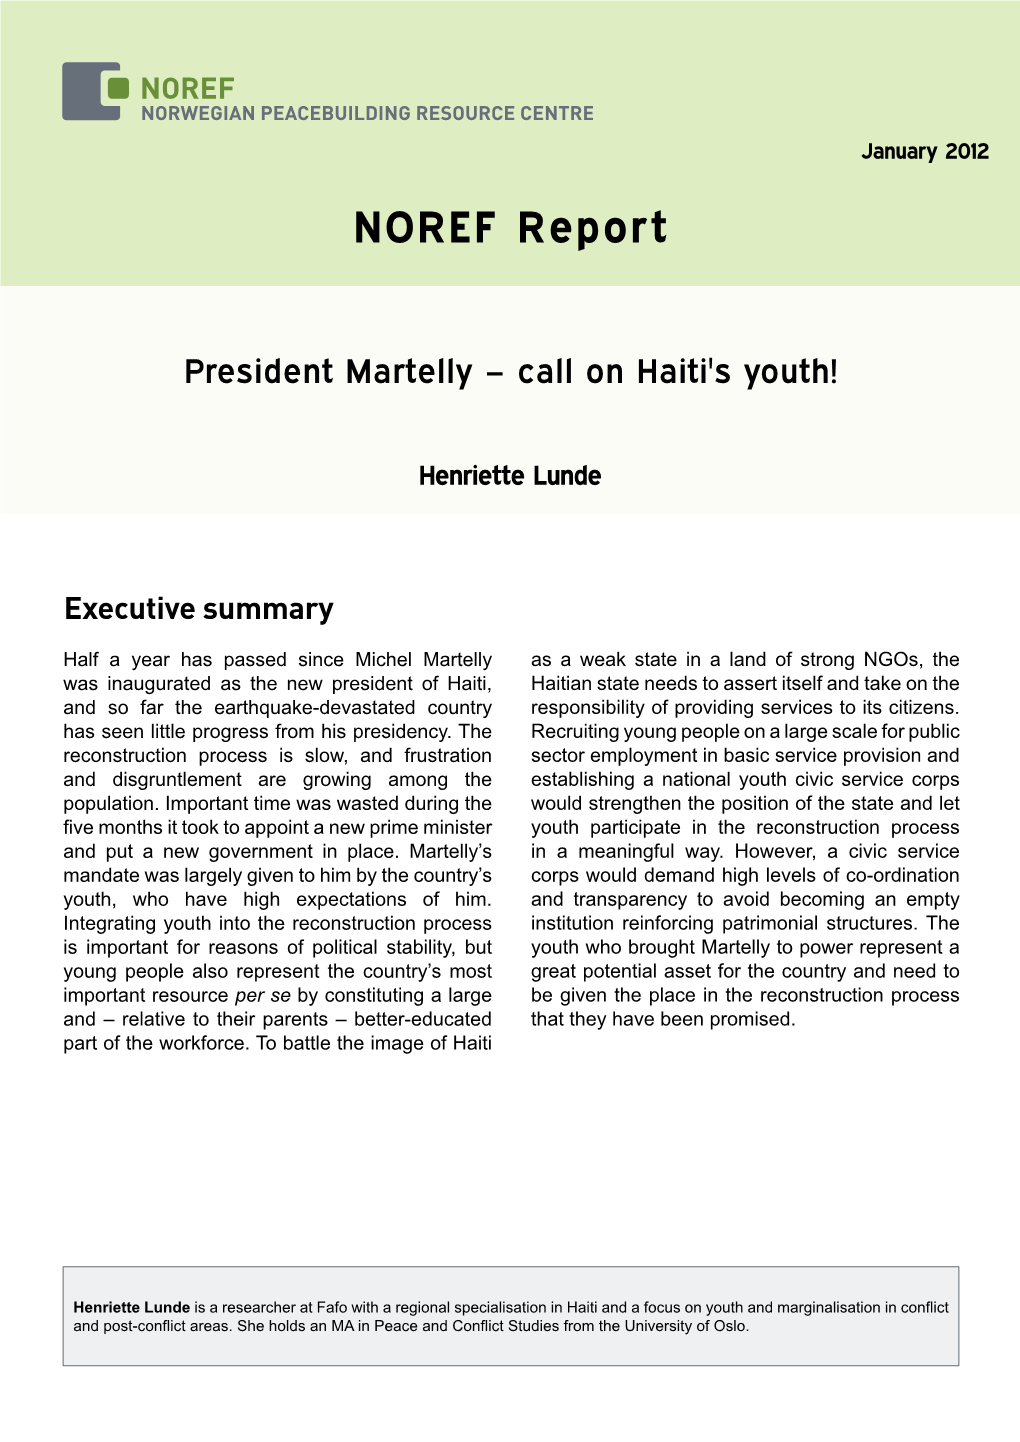 President Martelly – Call on Haiti's Youth!